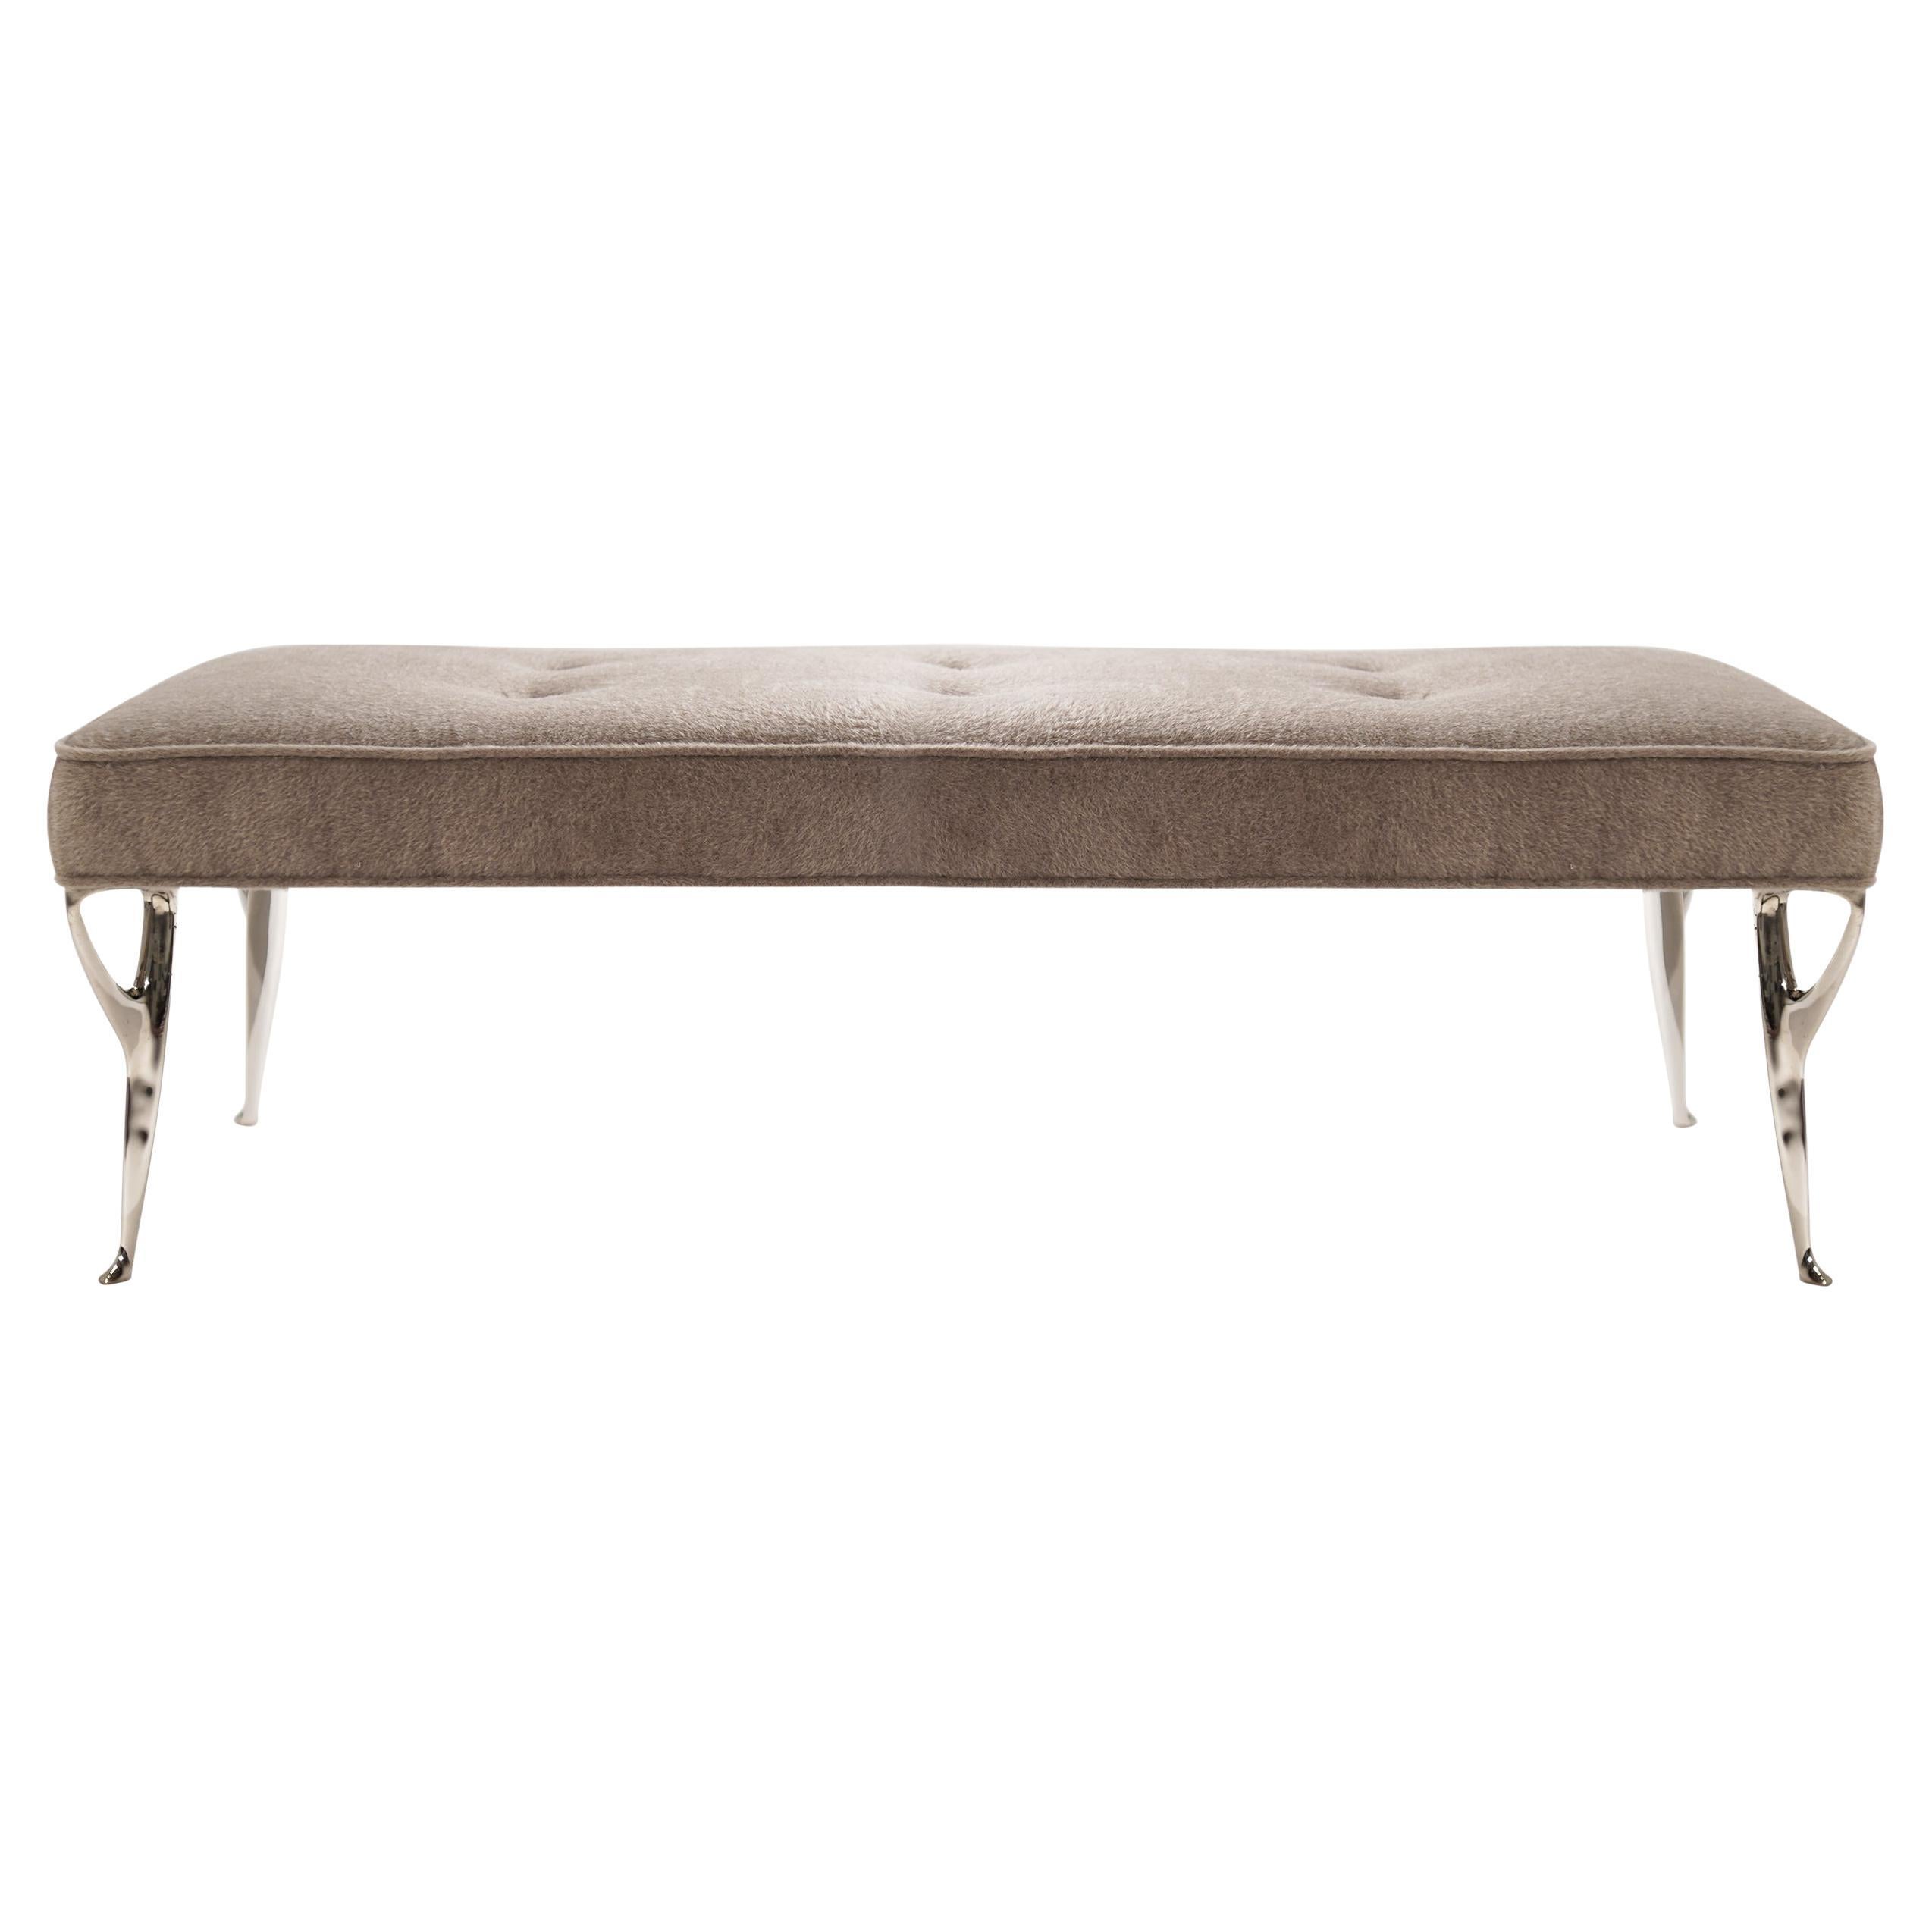 A bench original from Italy, circa 1950-1959. It features sculptural white brass cast legs, which have been hand-polished—newly upholstered in soft brown long-hair mohair.

Other designers working in the organic style include Carlo Mollino, Franco